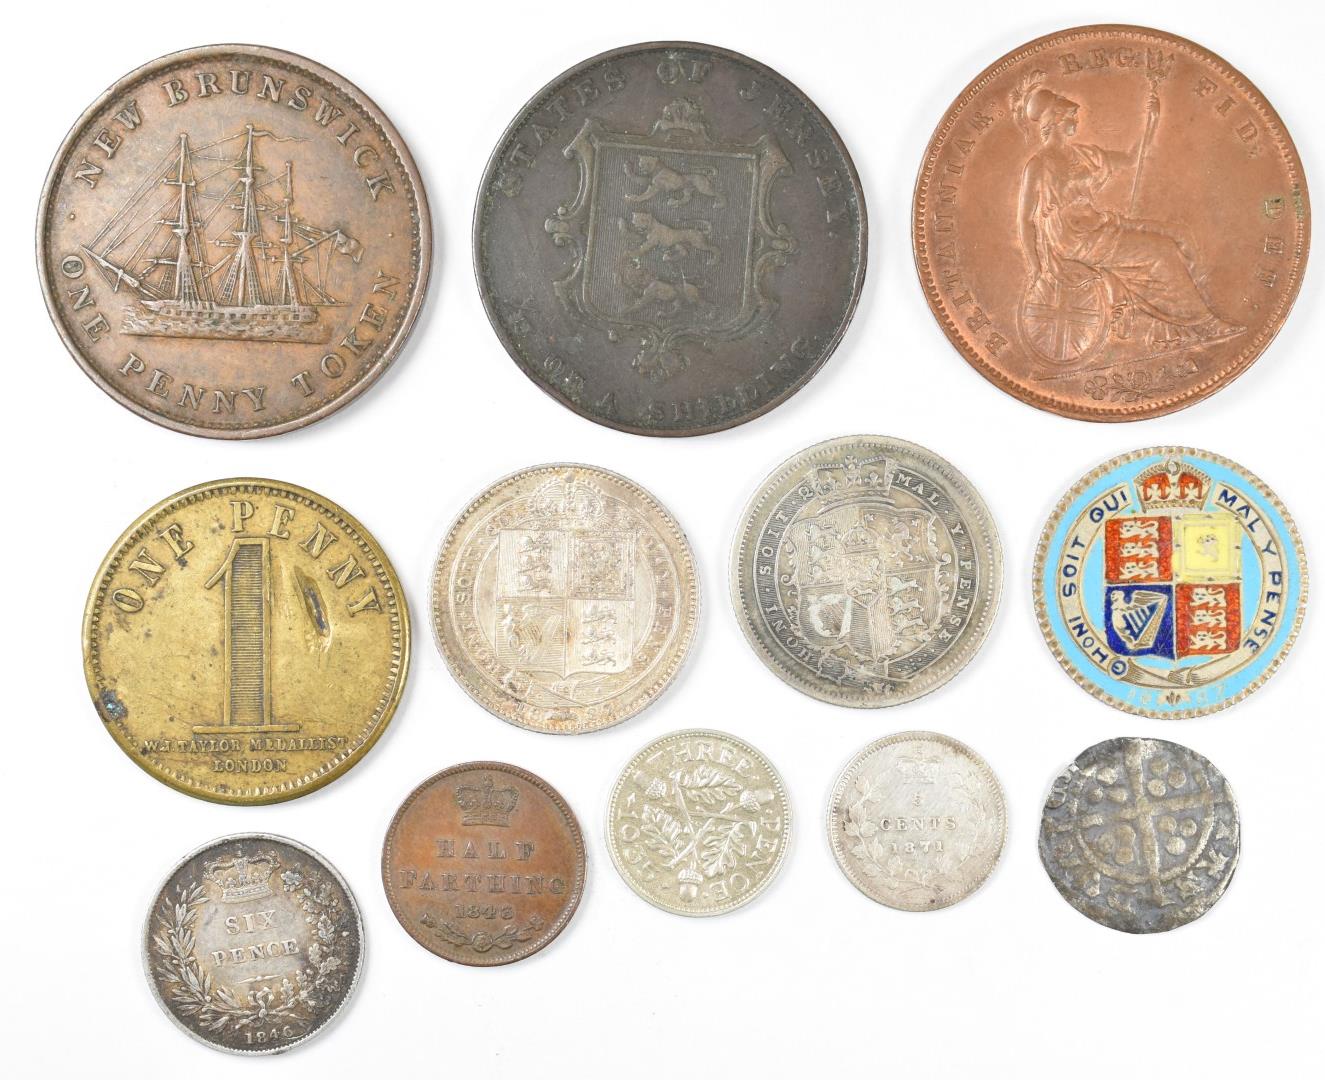 Collectible Victorian coinage and tokens including 1848 one penny with some original patination, - Image 2 of 2